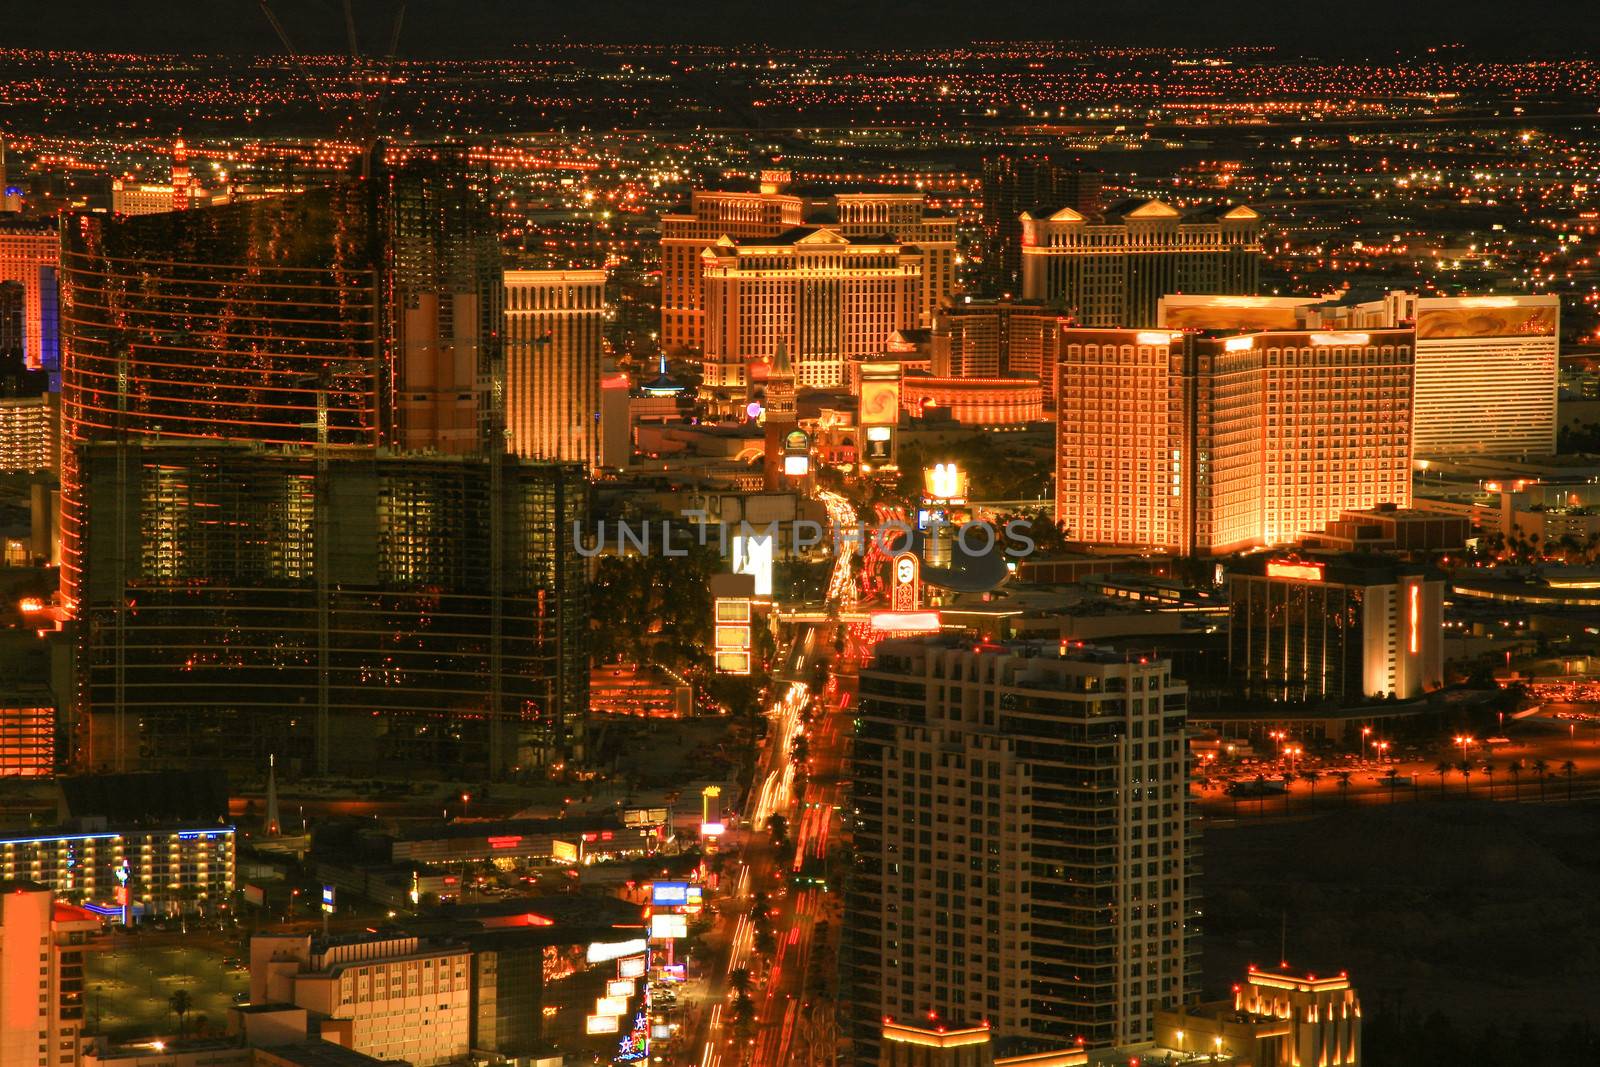 Aerial view of a city lit up at night, The Strip, Las Vegas, Nevada, USA